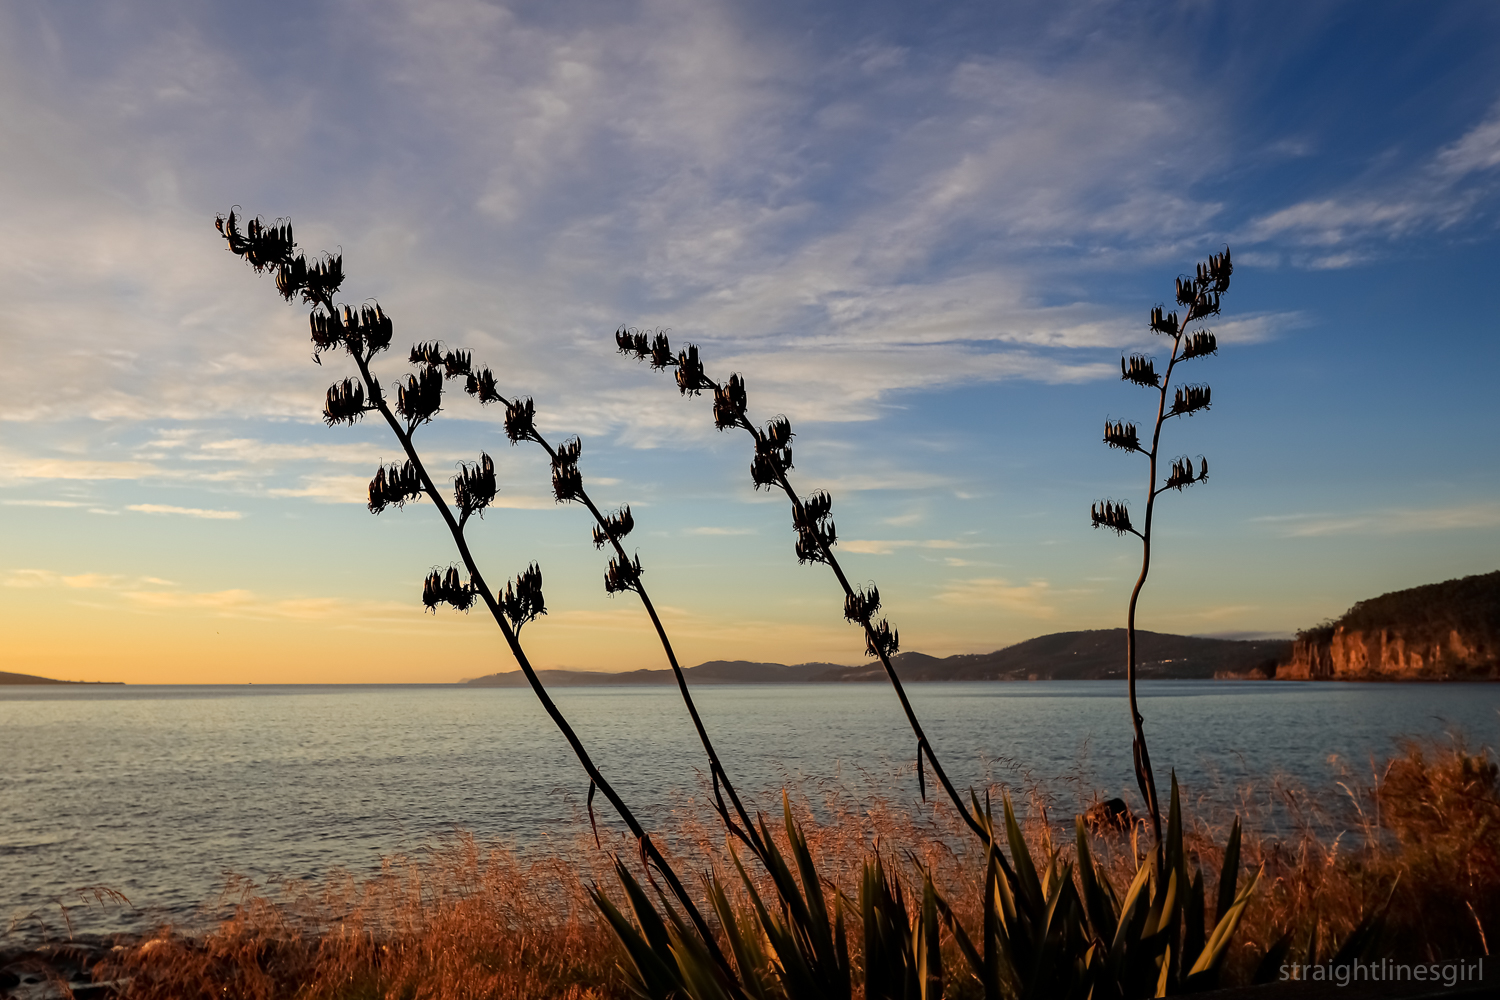 Flax plants in the foreground of an early morning beach scene